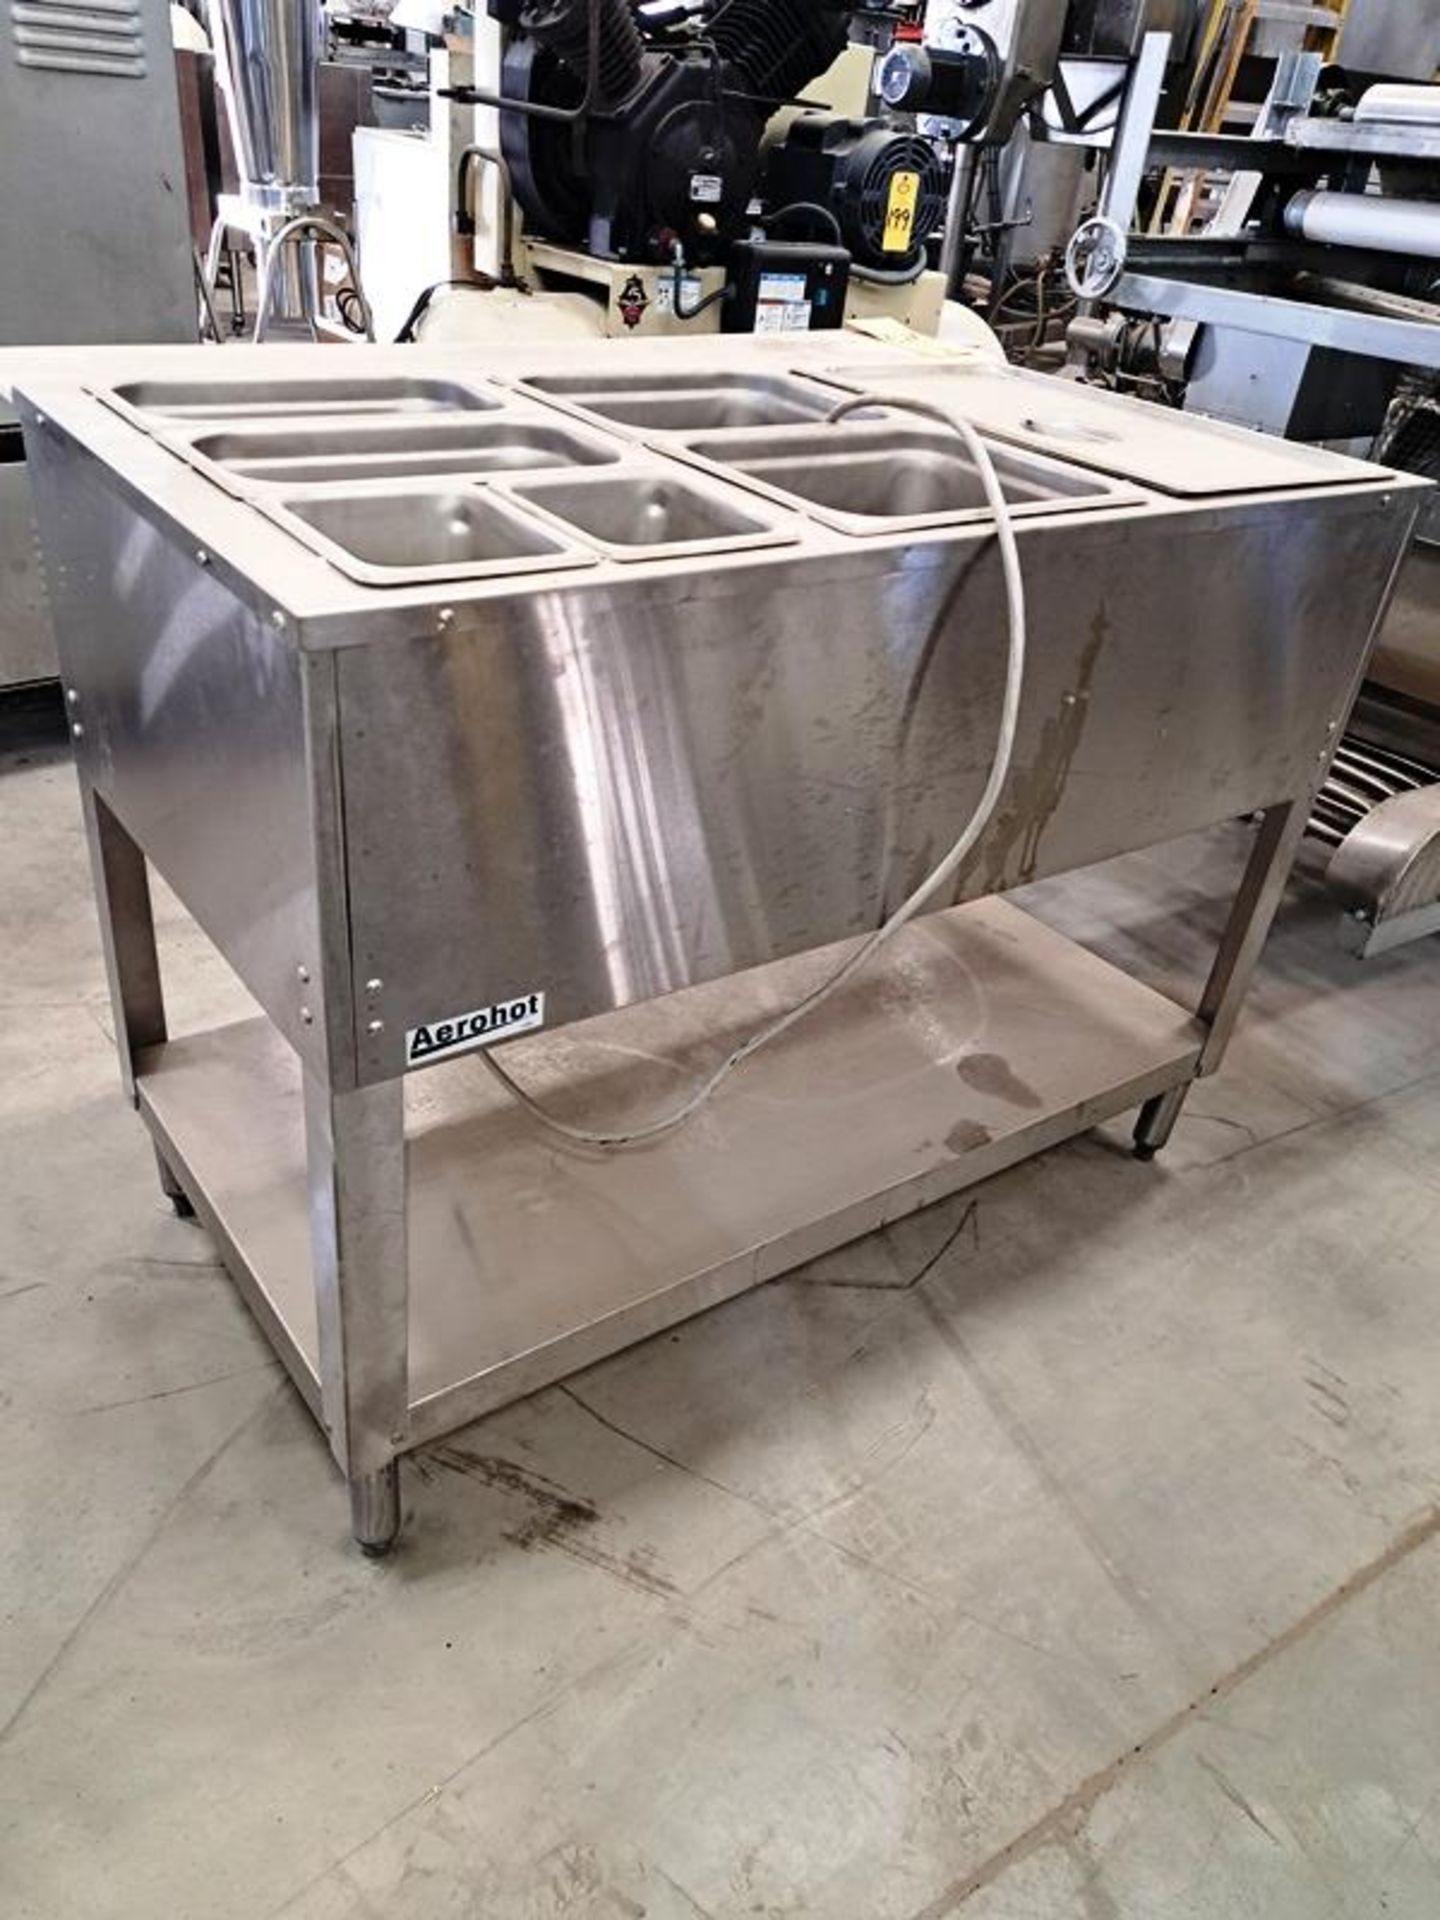 Duke Mdl. E303M Steam Table, Ser. #12150707, 120 volts (Required Loading Fee: $25.00) NO HAND - Image 2 of 2